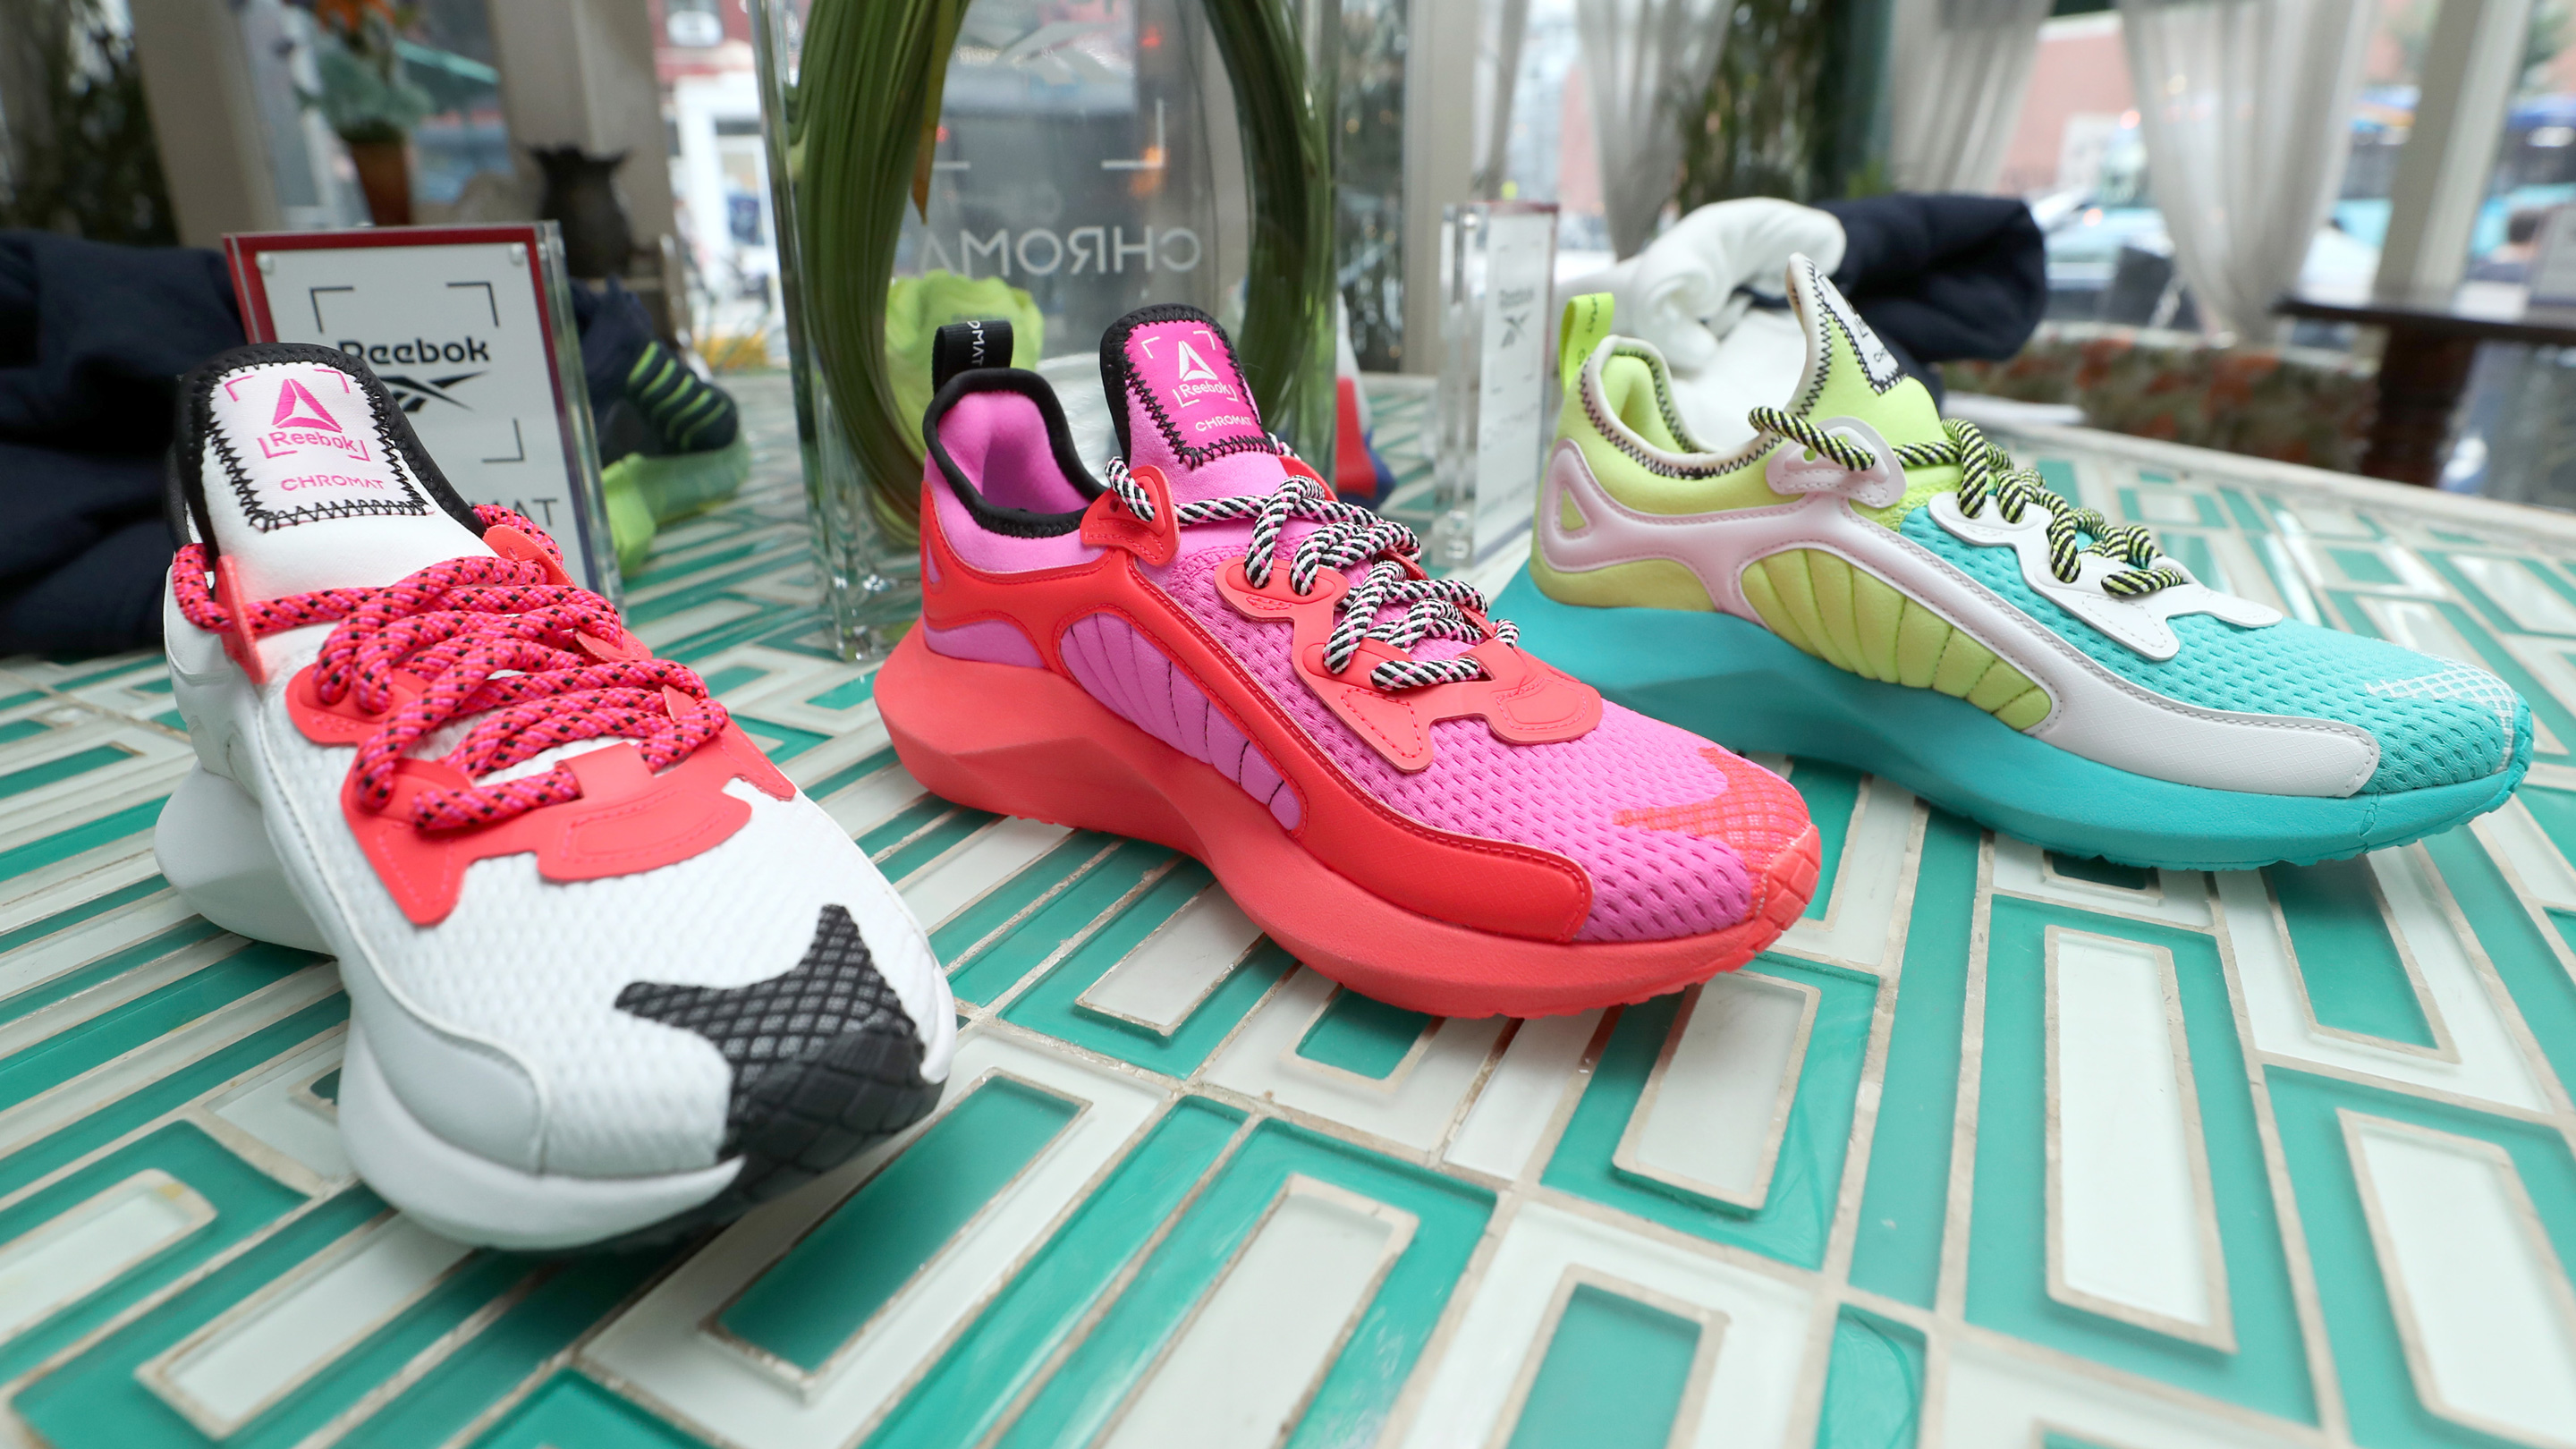 Adidas trying to figure out what to with Reebok -